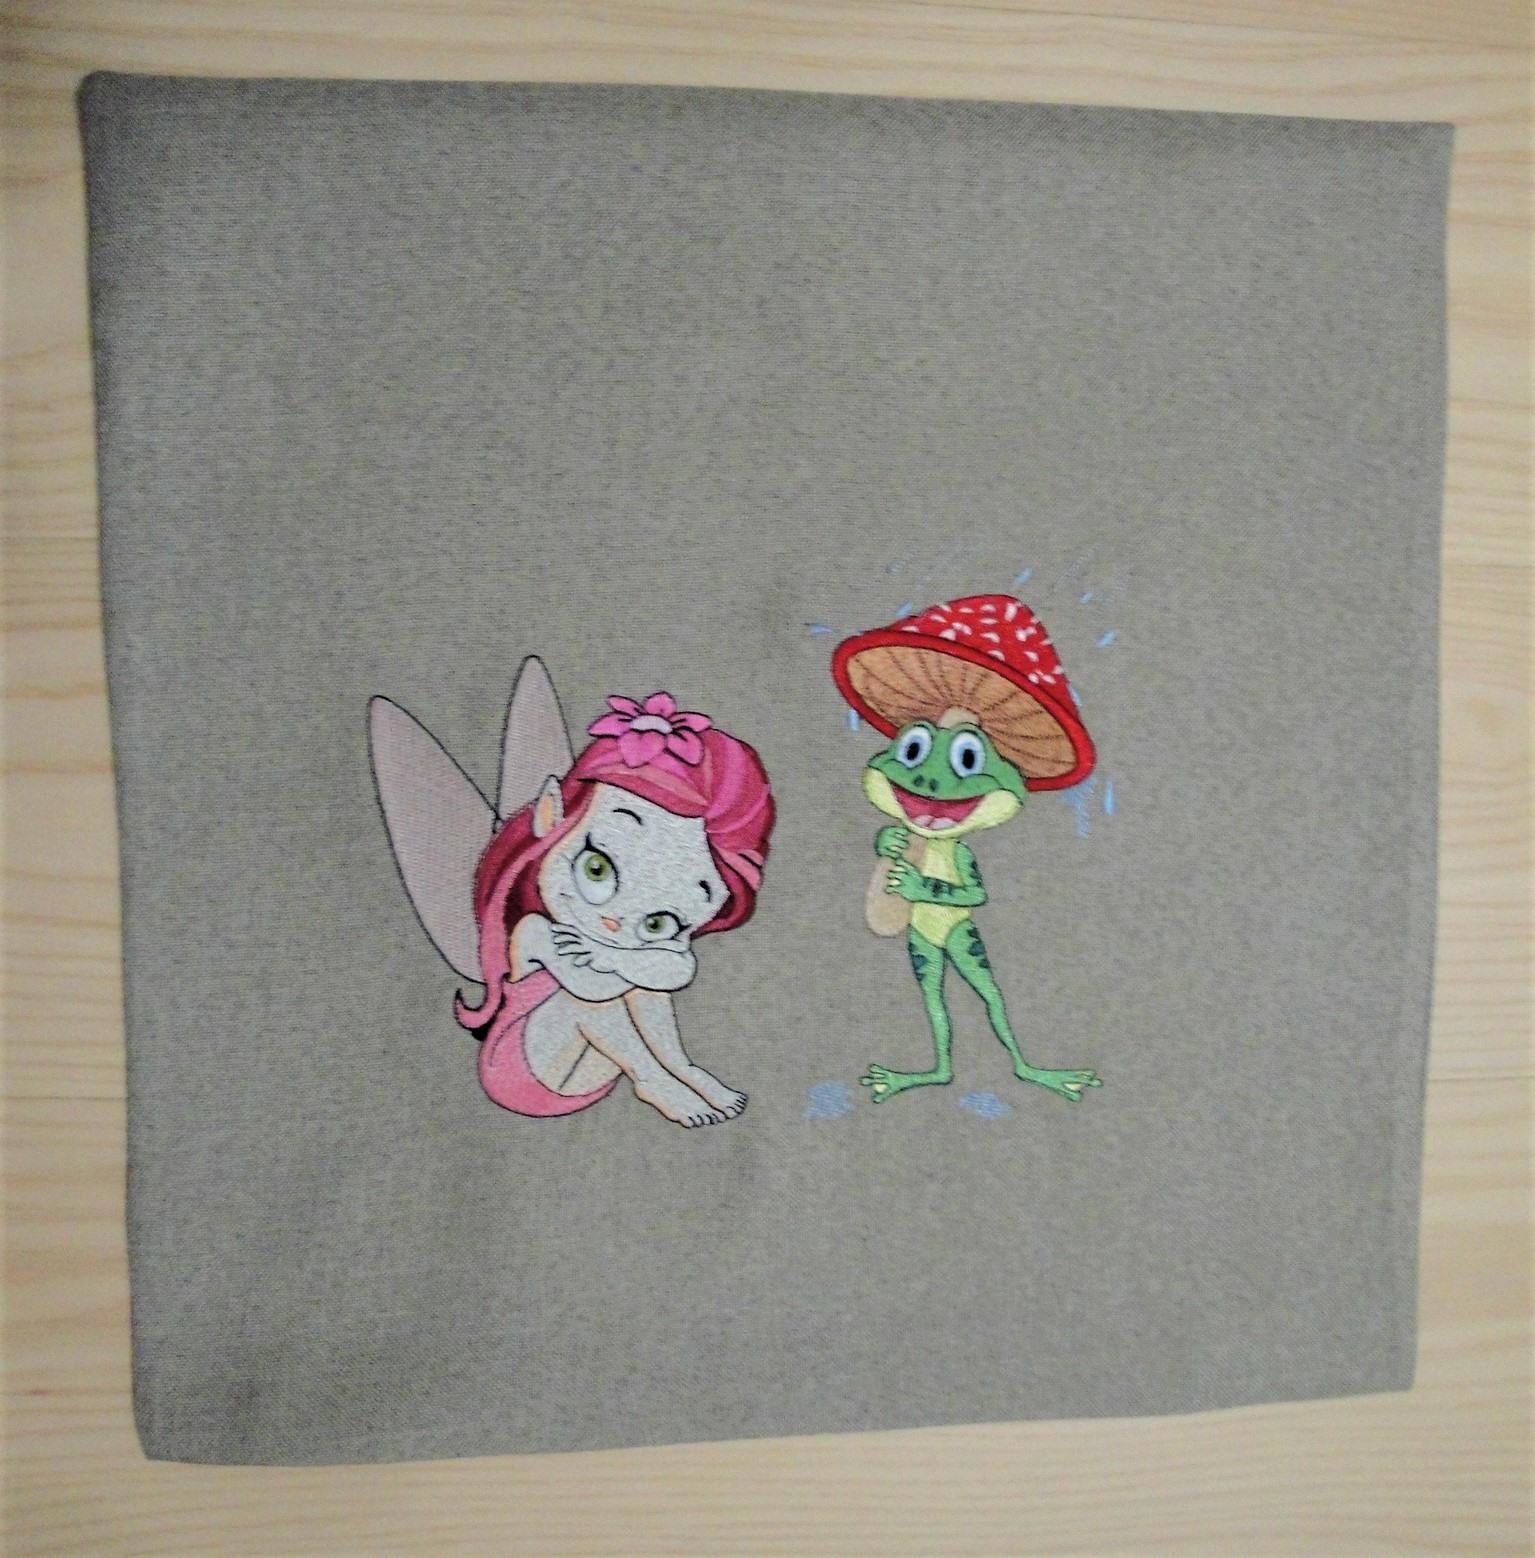 Embroidered pillowcase with cartoon characters